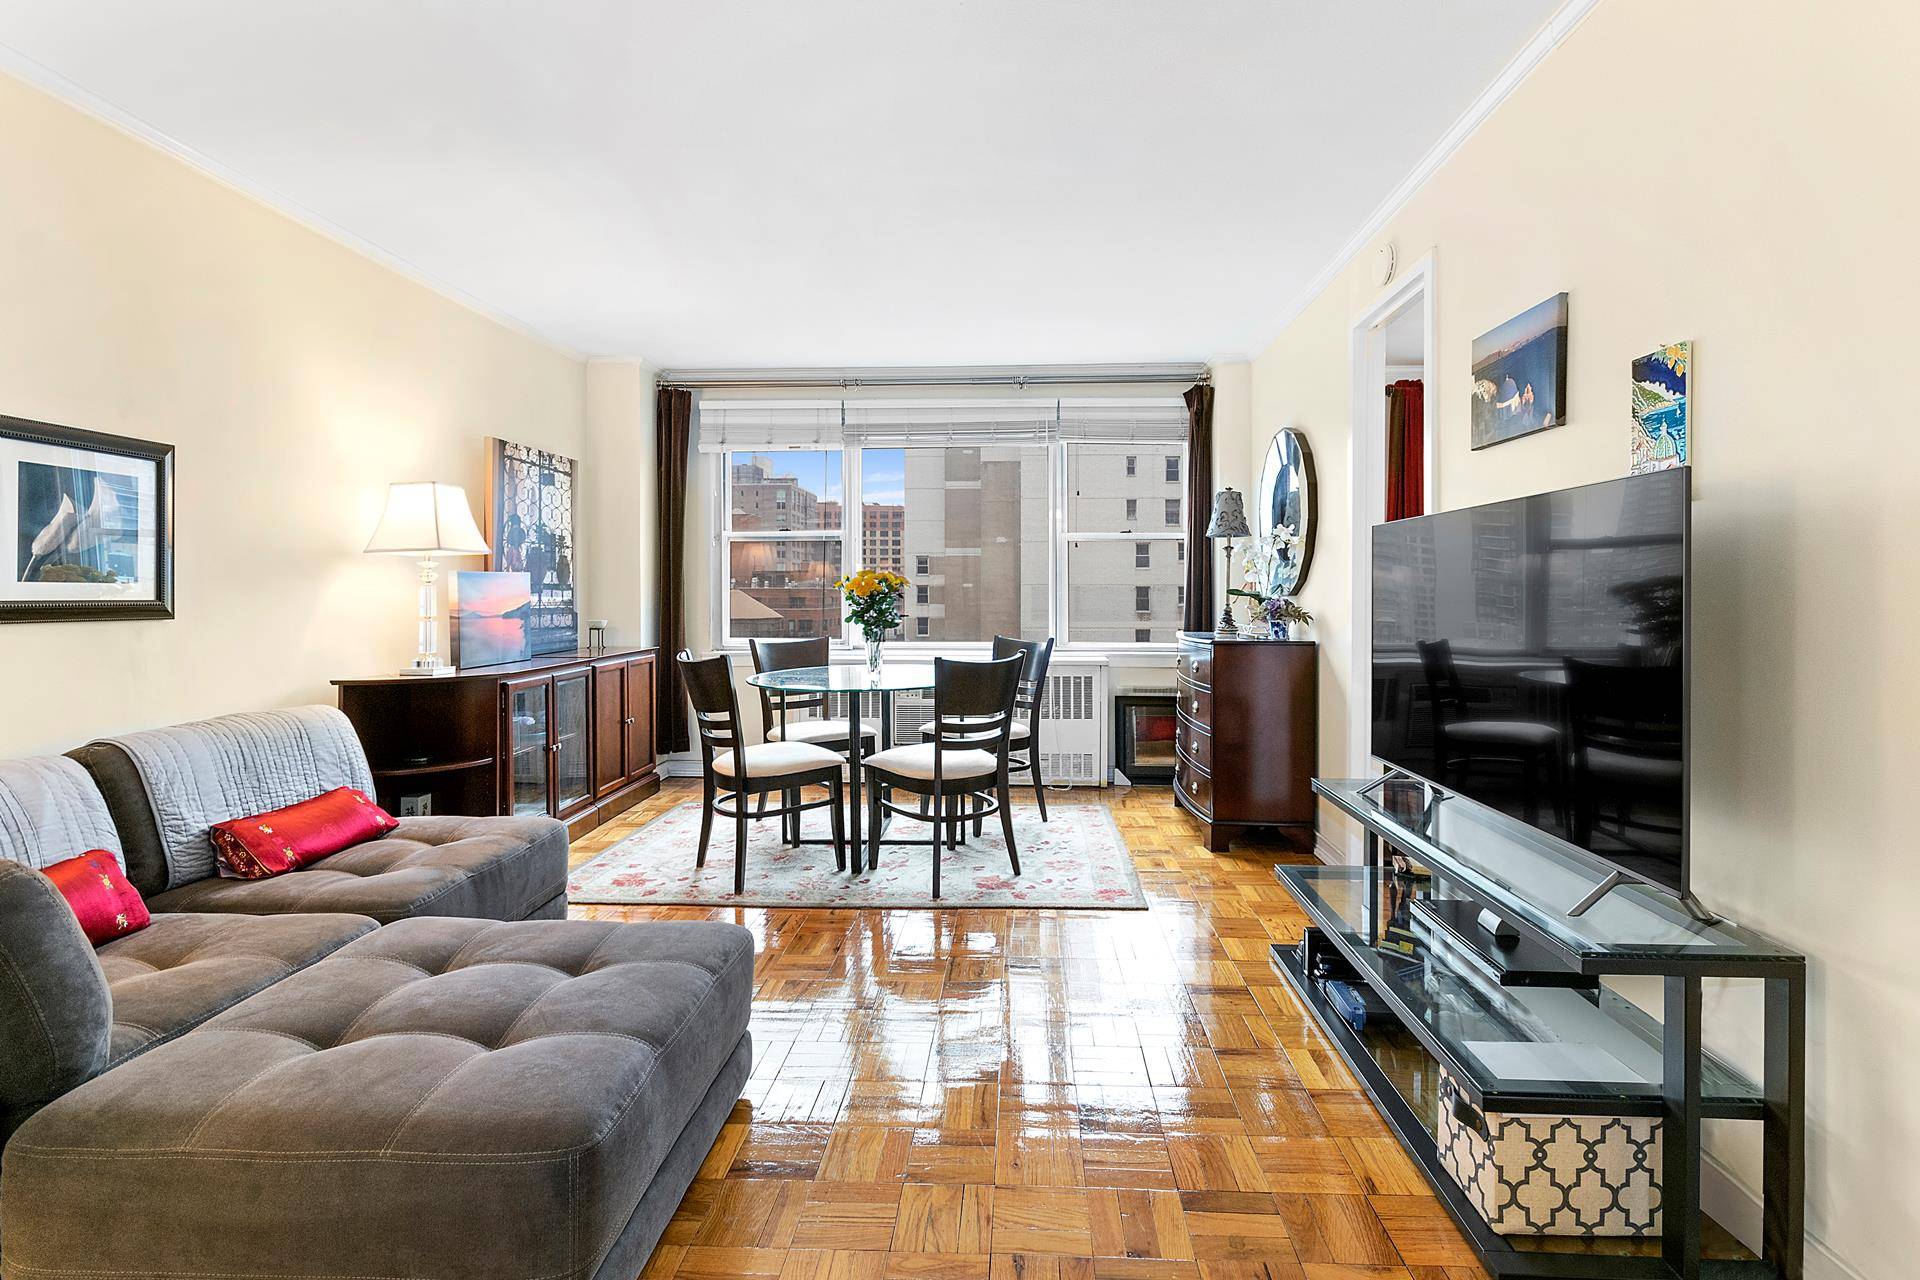 Spacious corner apartment with Open South views located in a prime Murray Hill location close to all transportation, great restaurants and nightlife.